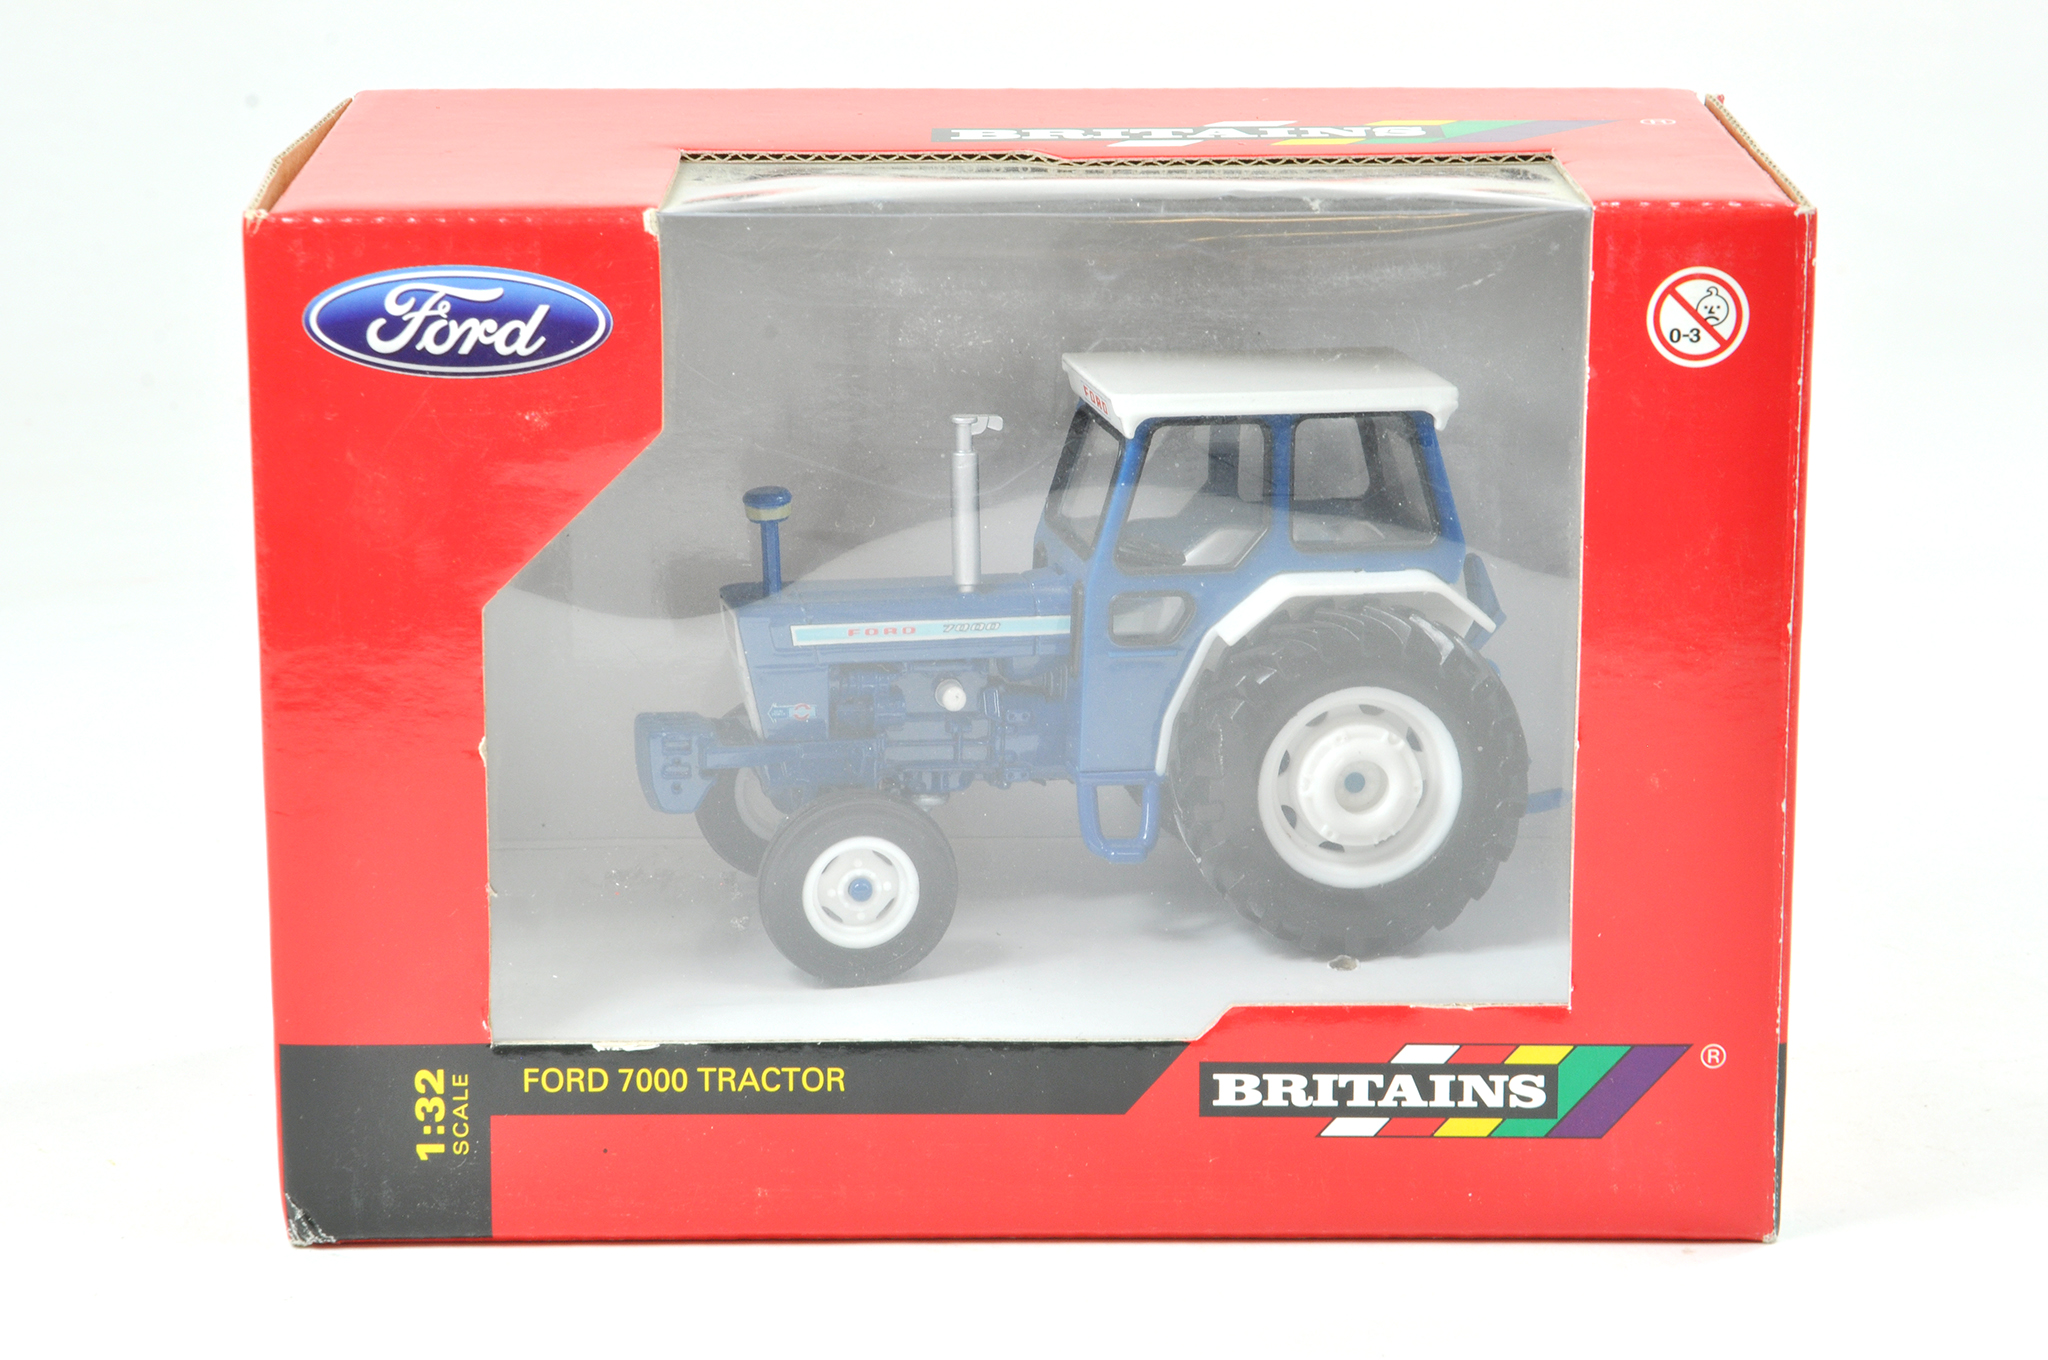 Britains 1/32 Farm issue comprising Ford 7000 Tractor. Previously on display, the model appears very